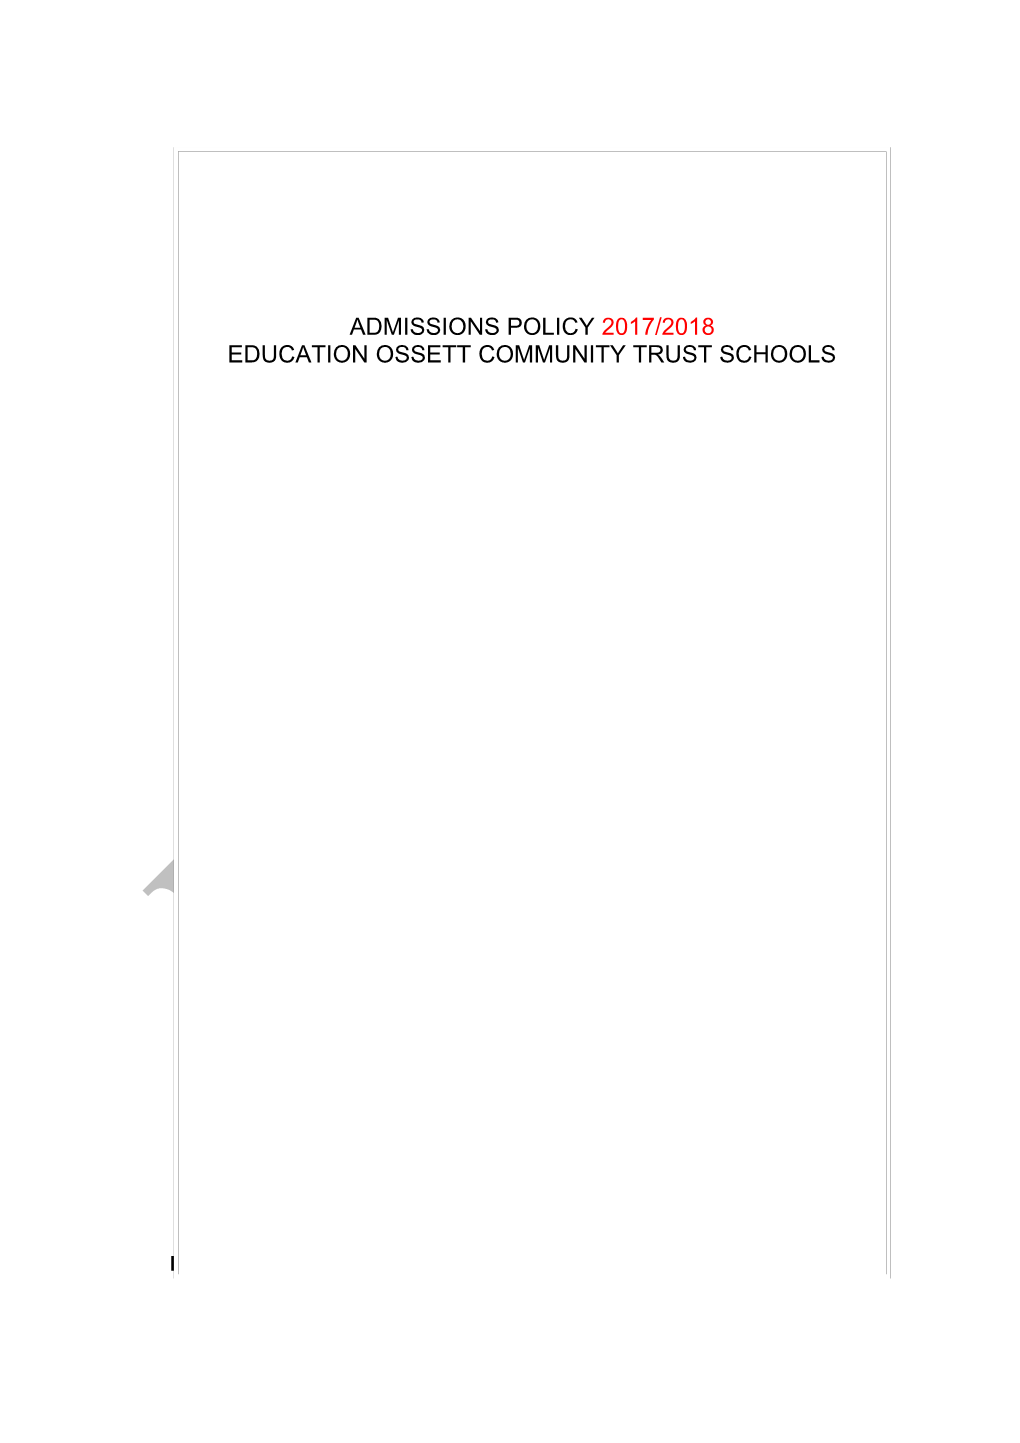 School Admissions Policy 2007-08 and Setting of 'Relevant Area' Results by Annual Consultation